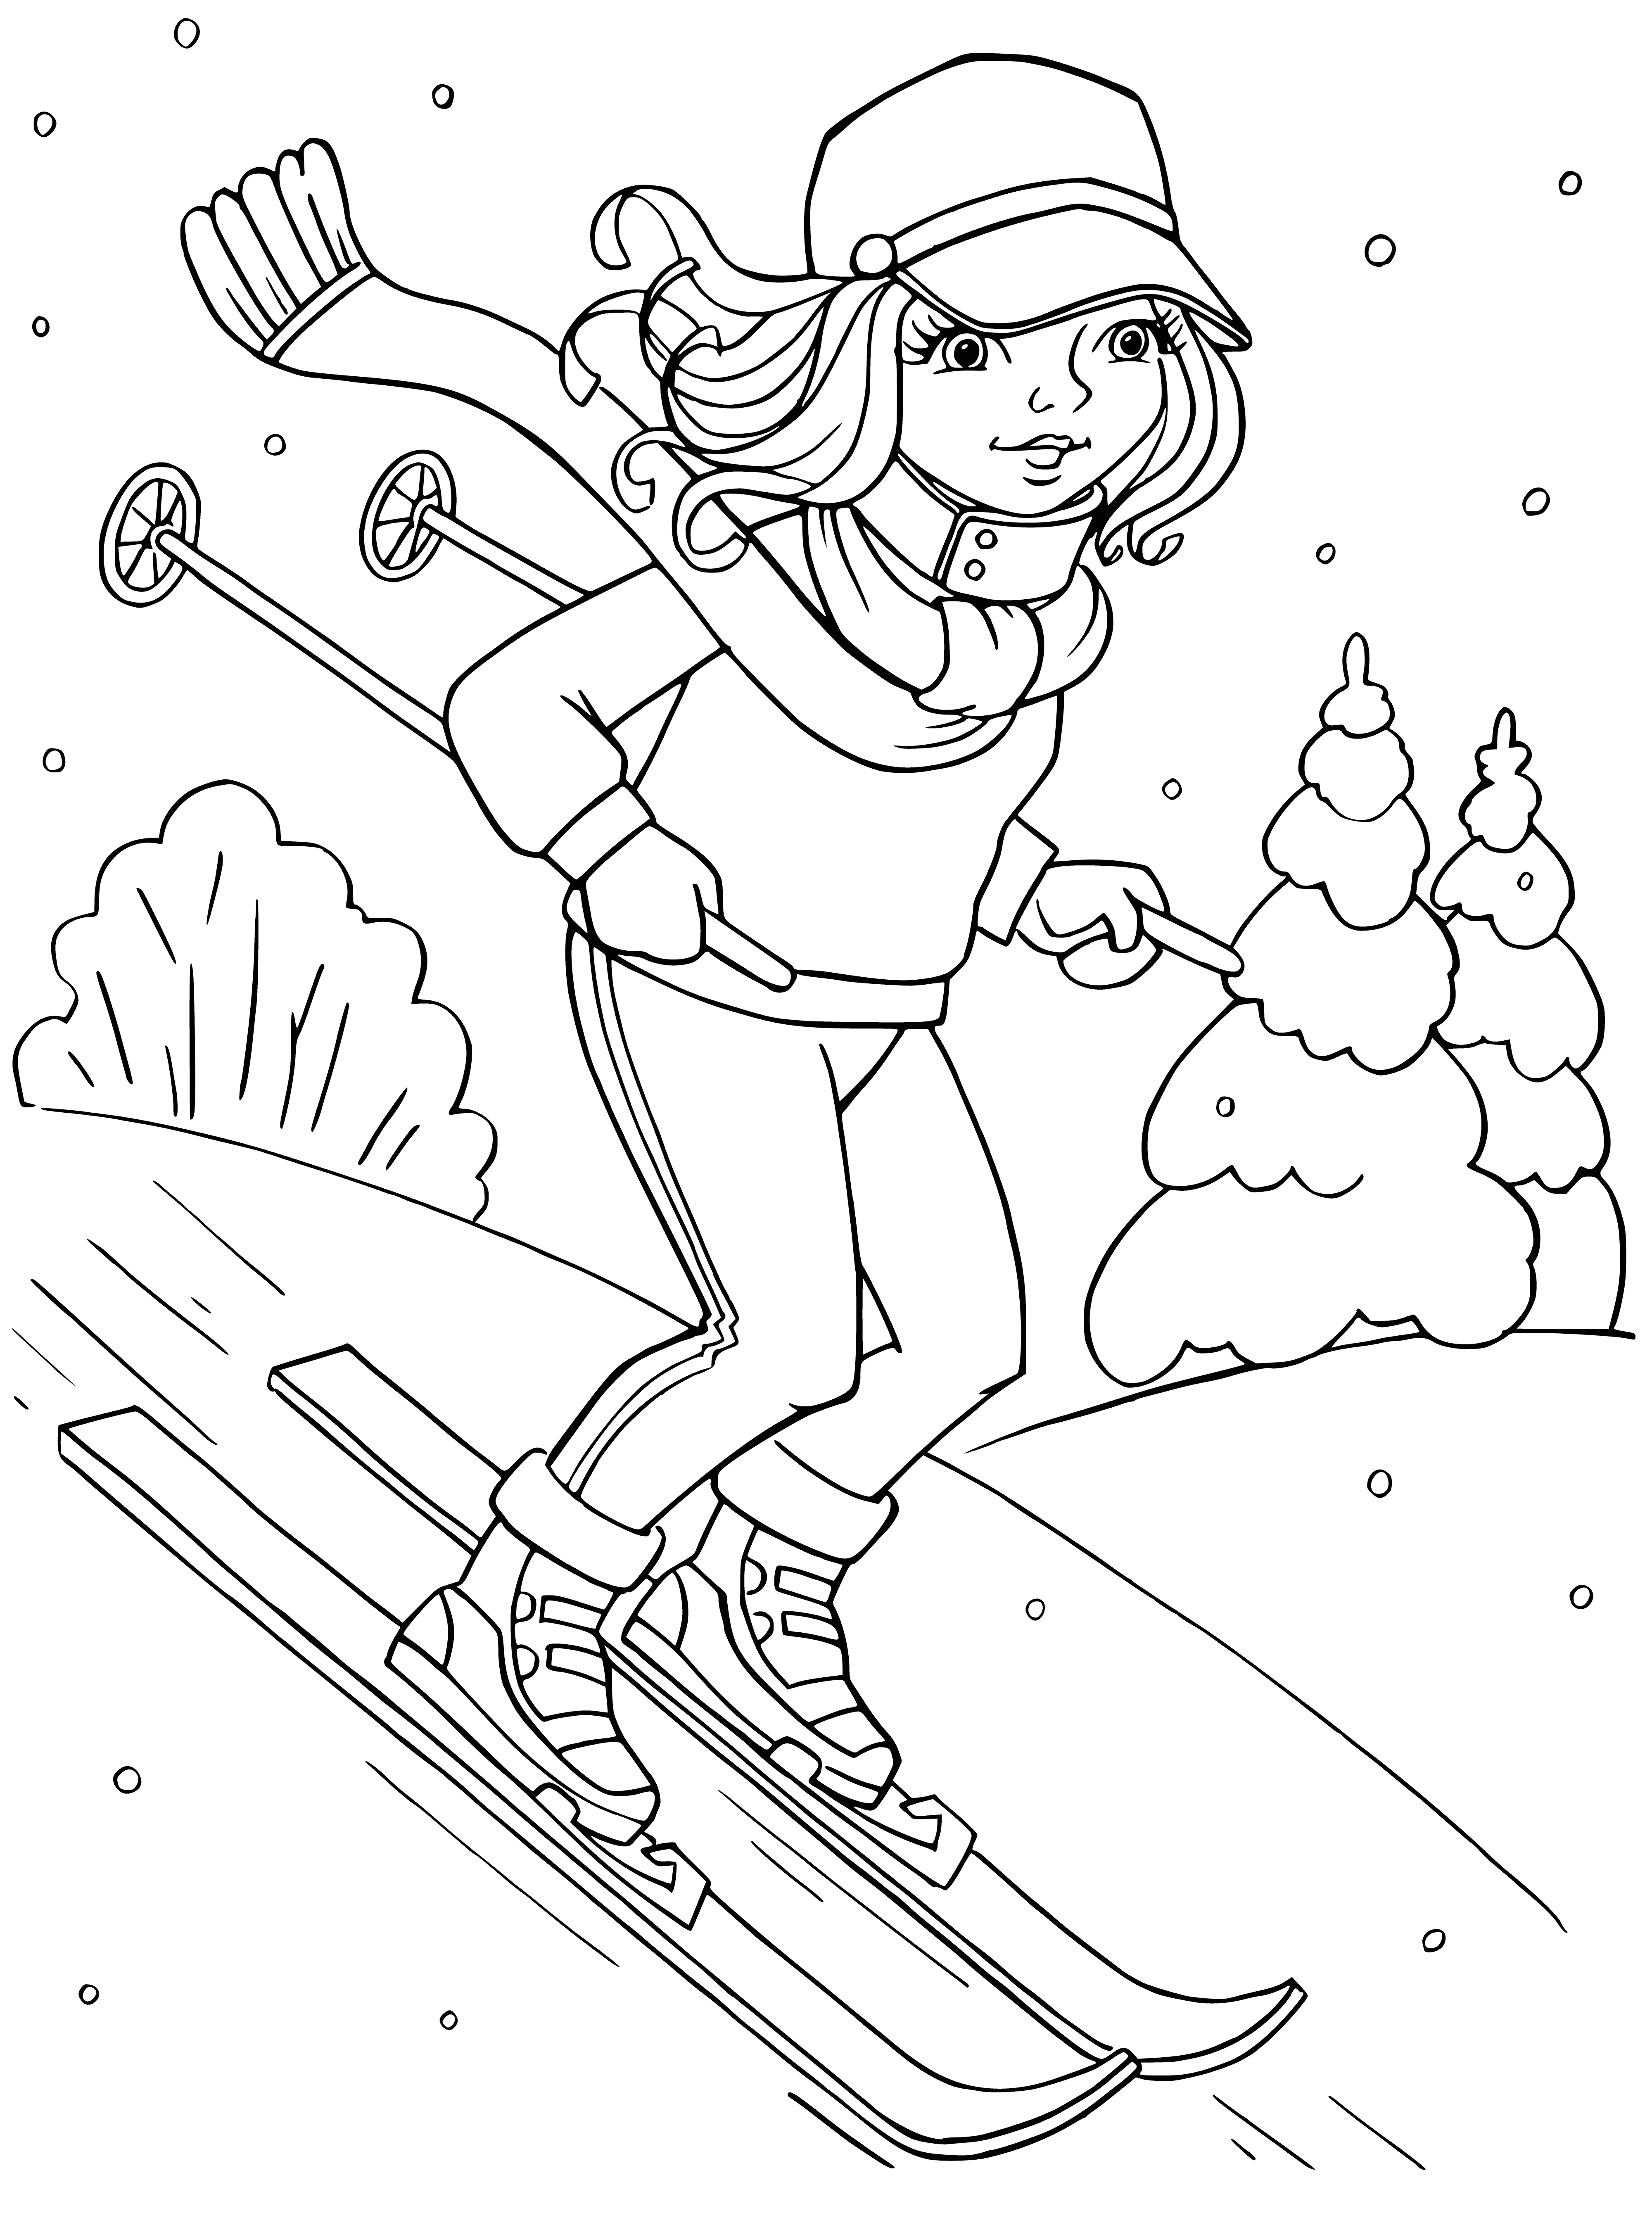 Skis coloring page